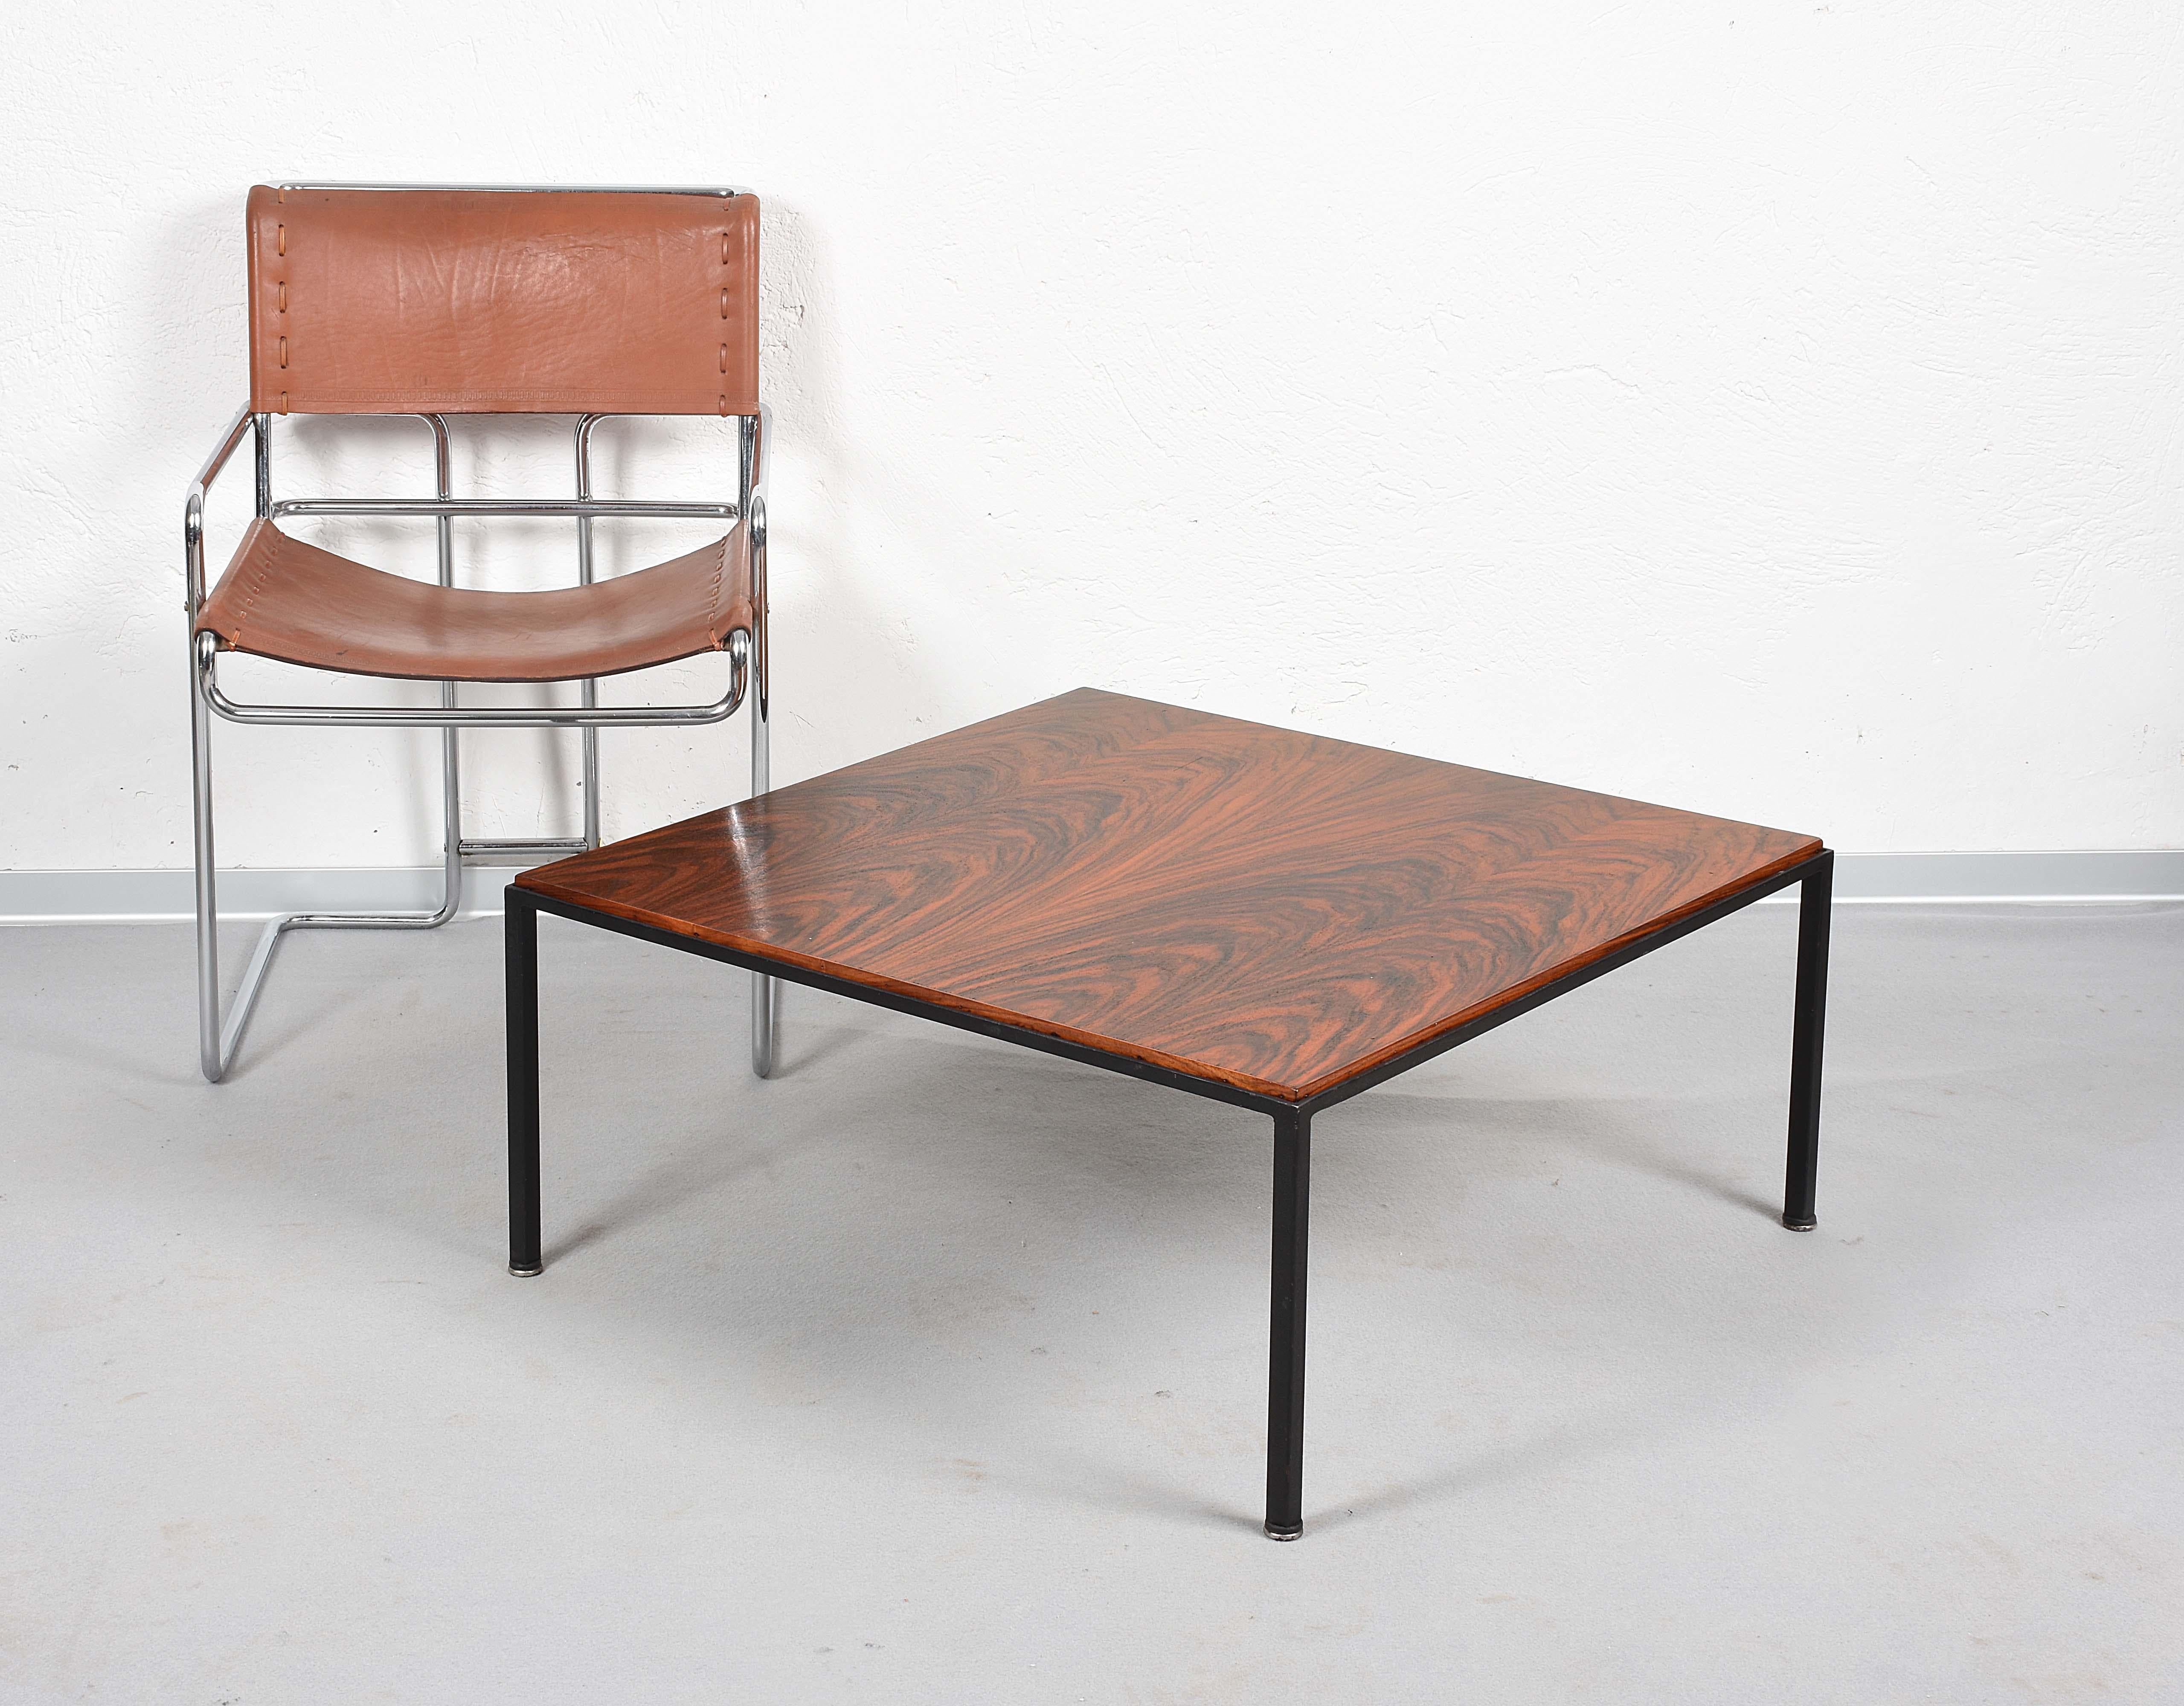 Italian Design Midcentury Wood and Iron Square Coffee Italian Table, 1960s For Sale 7